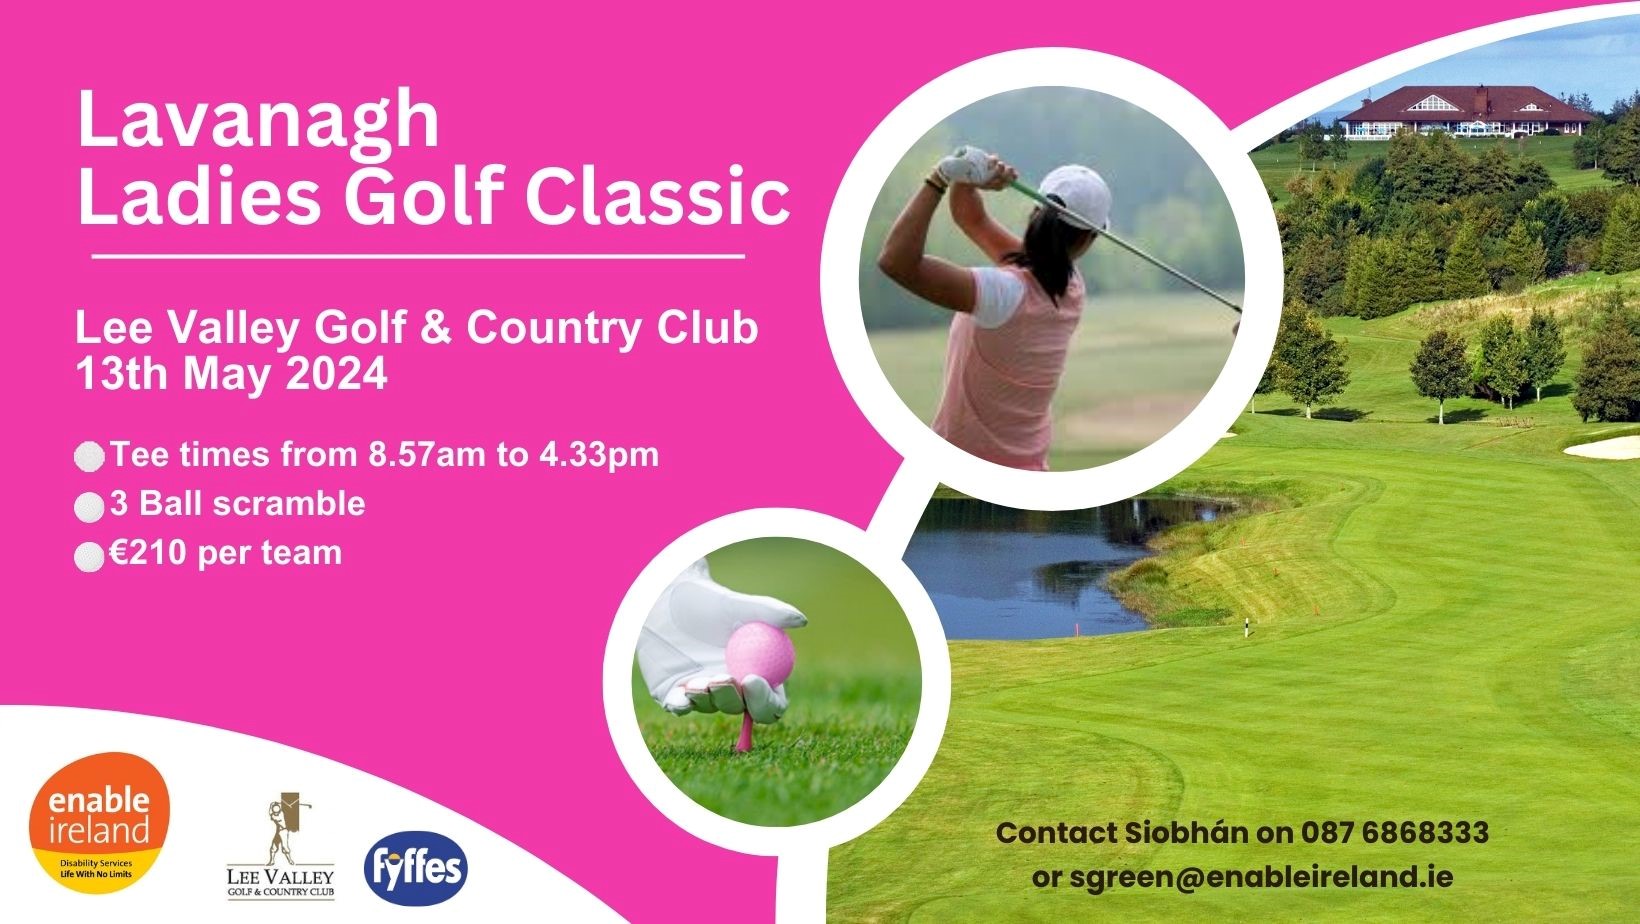 Pink Graphic with text that says: Lavanagh Ladies Golf Classic, Lee Valley Golf & Country Club 13th May 2024. Tee Times from 8.57am to 4.33PM. 3 ball scramble. E210 per team. 